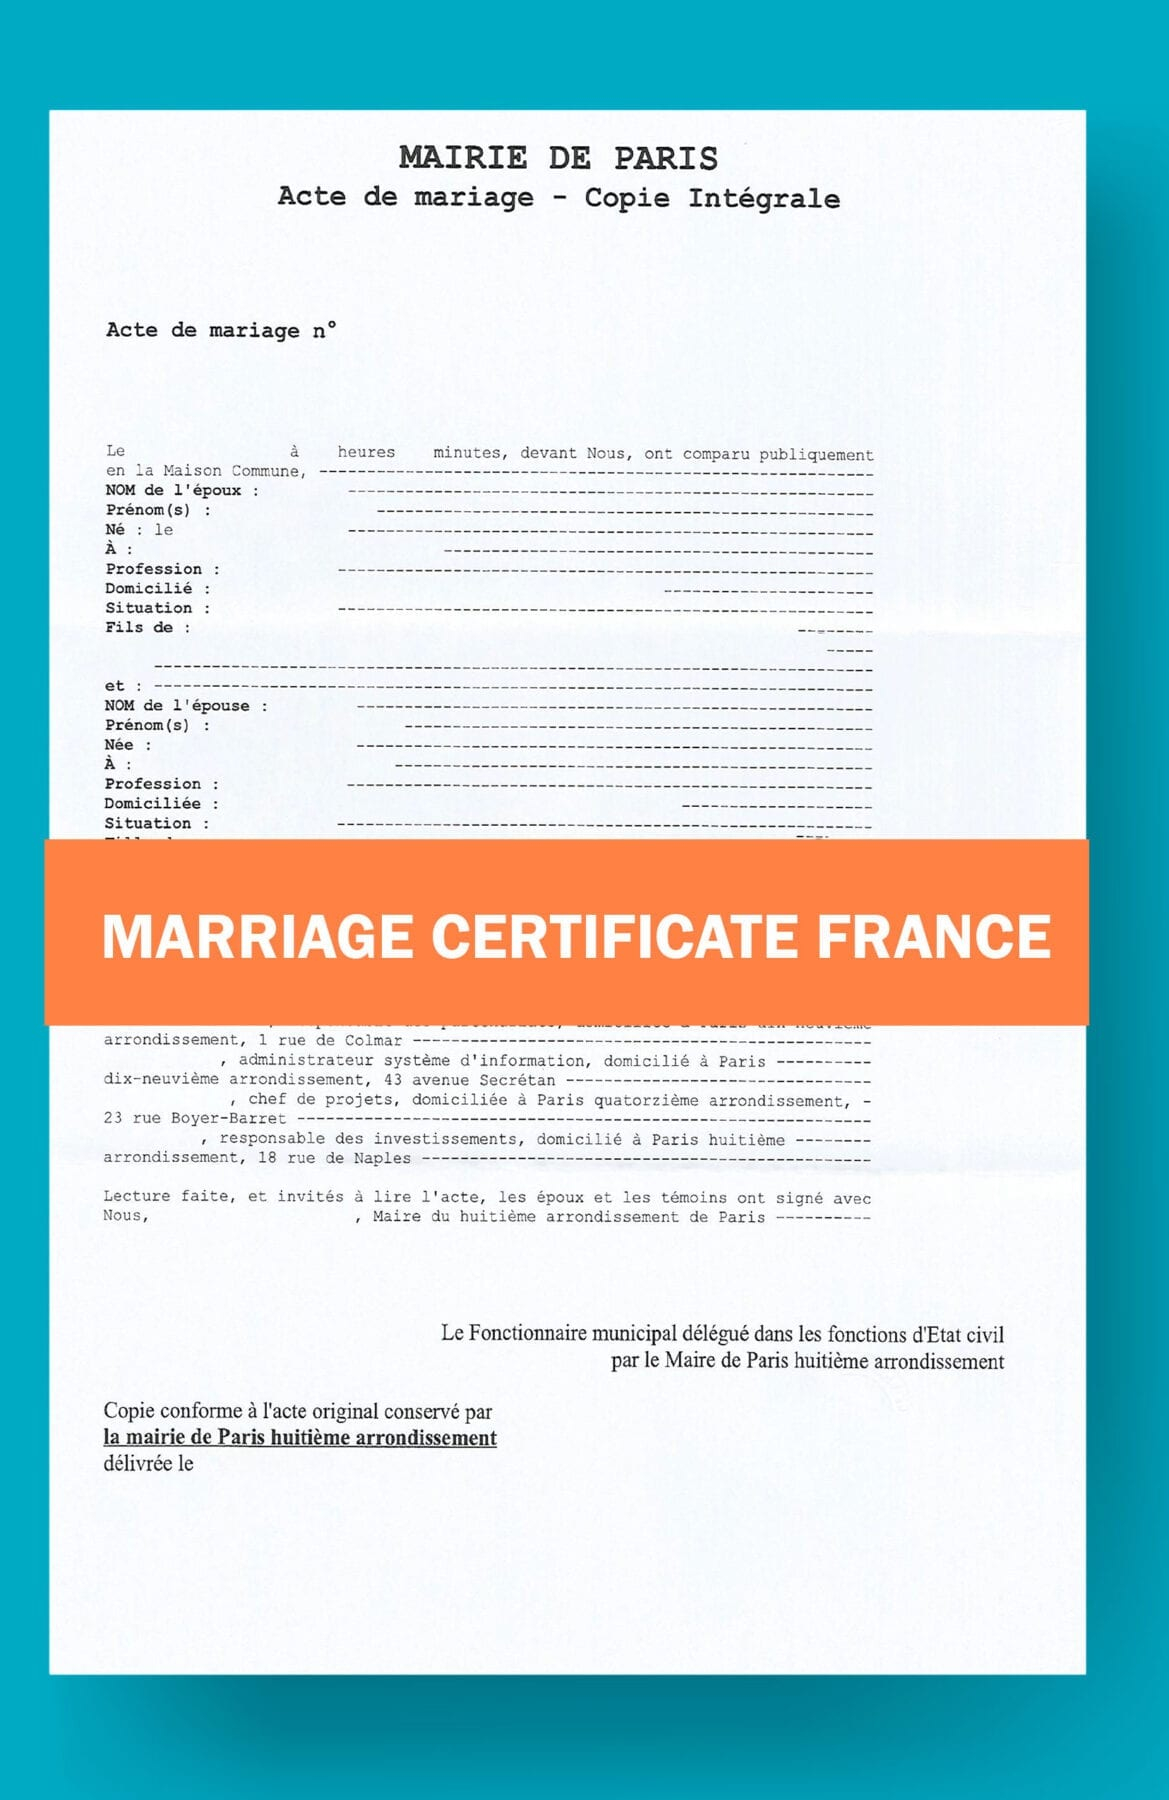 Marriage Certificate Translation $10 pp delivery same day no extra  With Marriage Certificate Translation Template